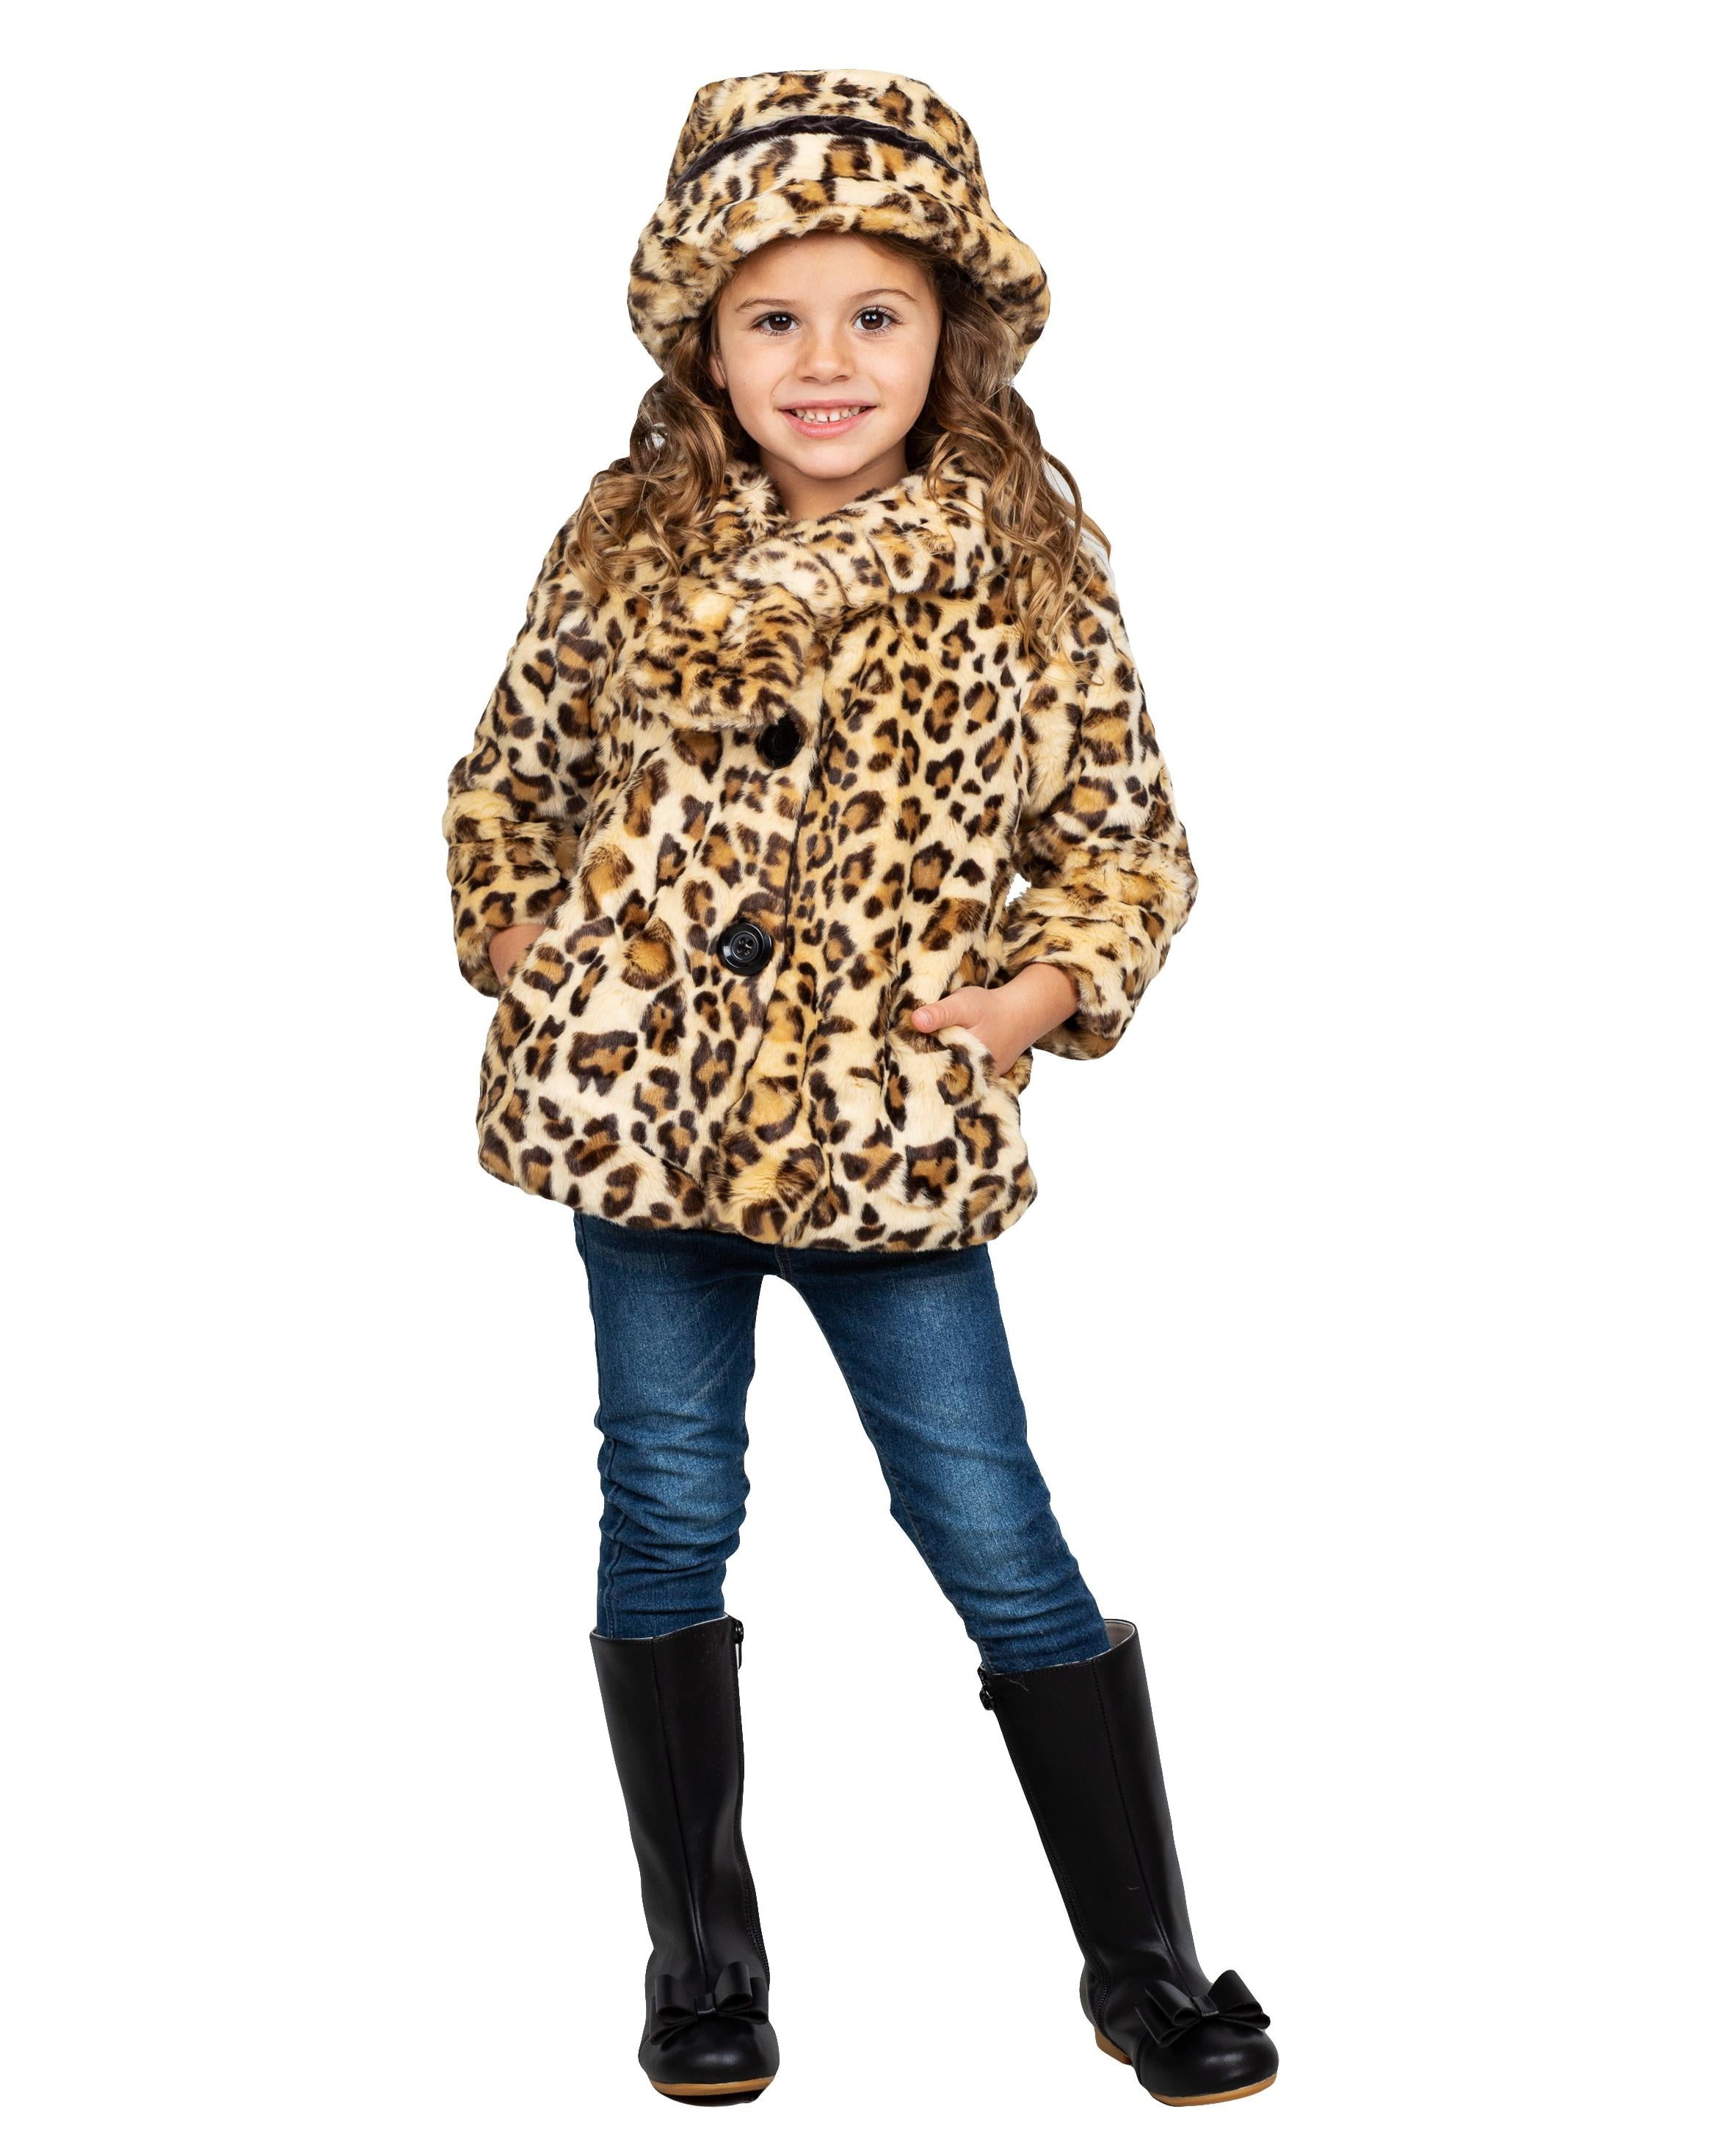 12 Month to 5 Year Infant,Toddler Girl's Fall Winter Faux Fur dress coat jacket 